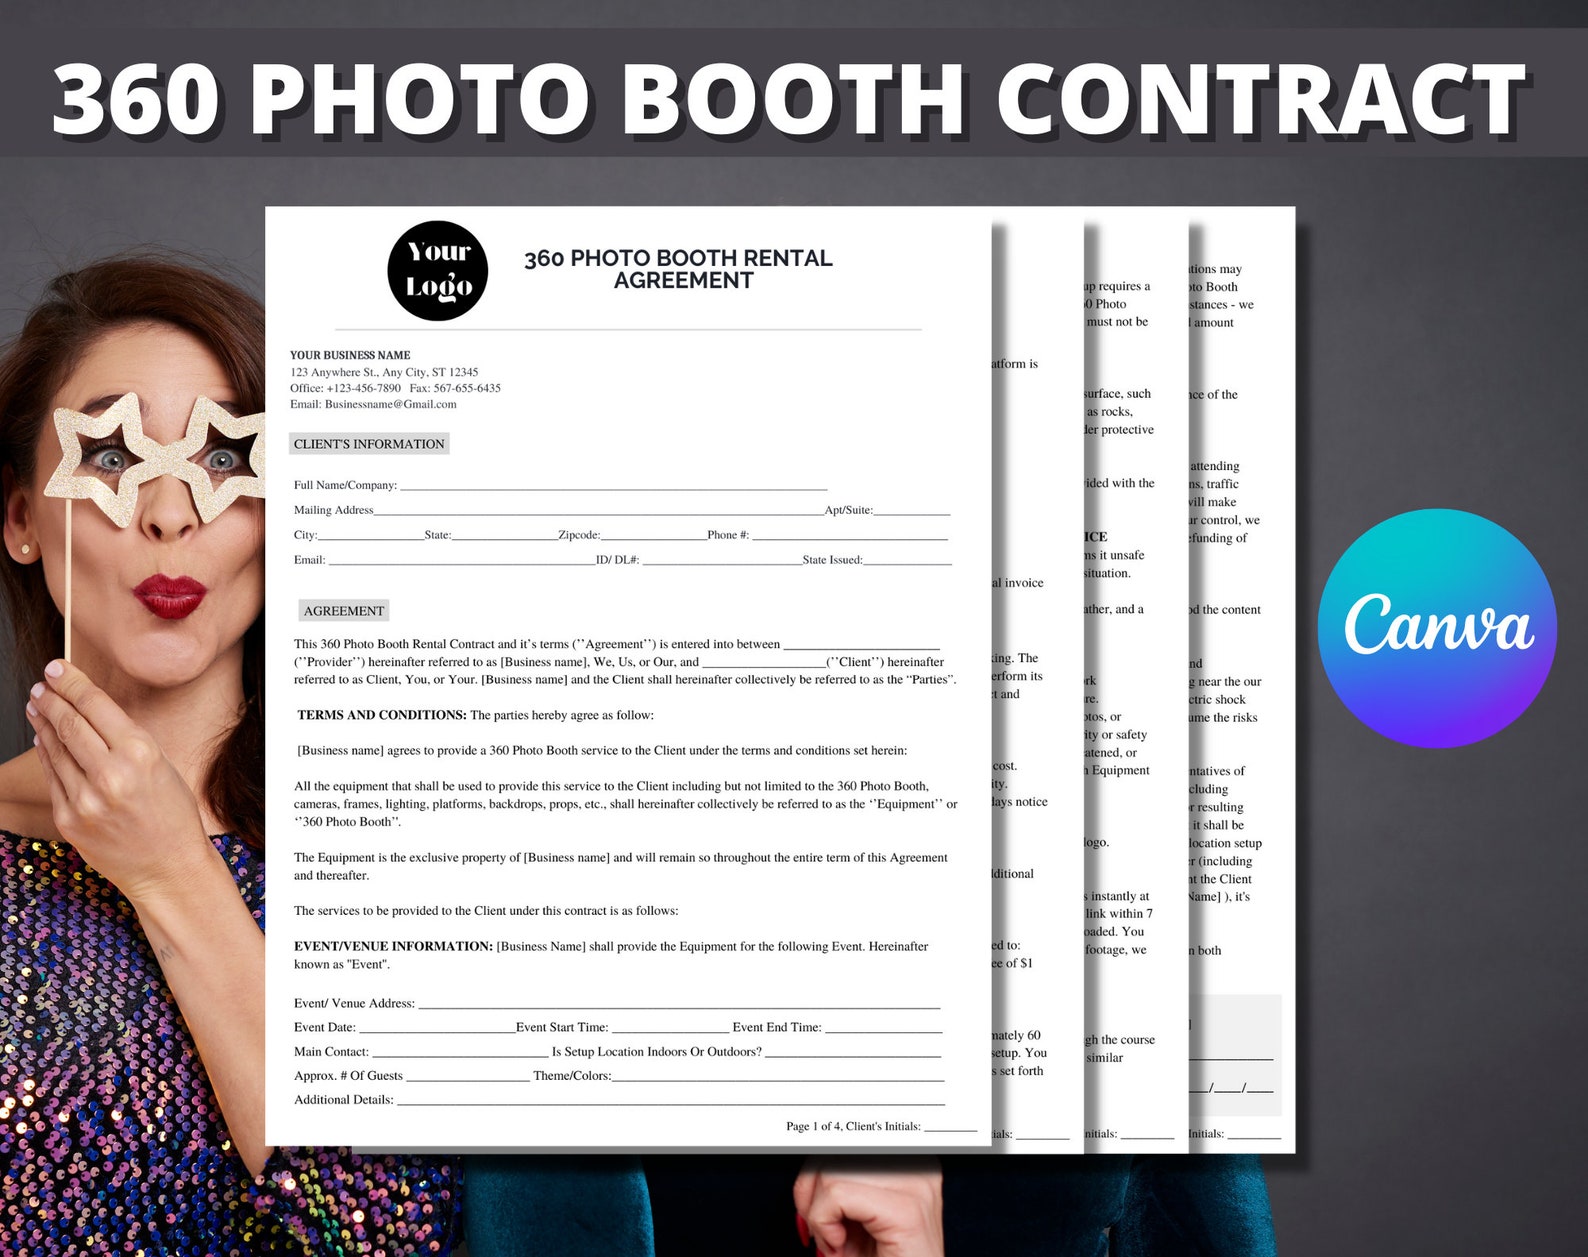 360-photo-booth-contract-template-360-photo-booth-rental-etsy